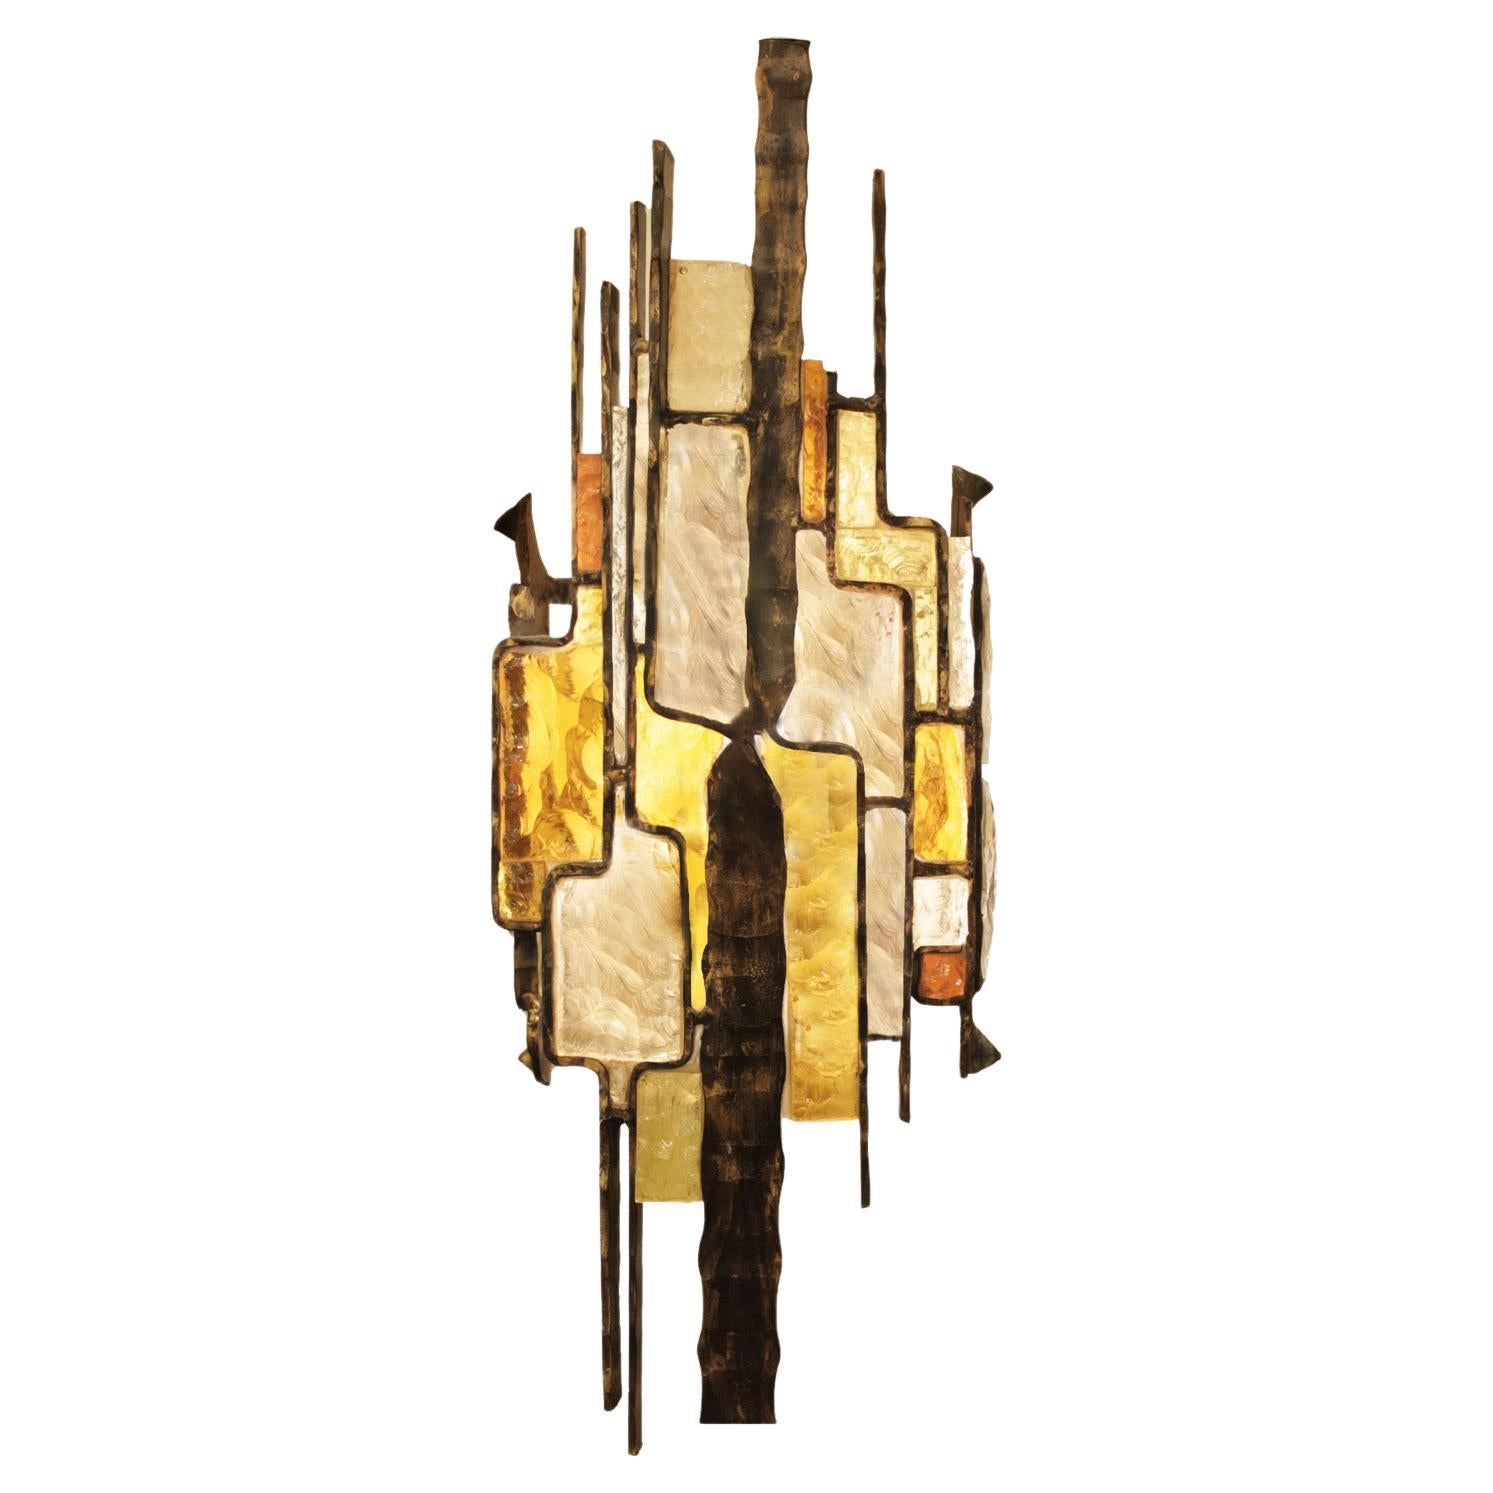 Brutalist style Murano glass and iron sconce with inset, irregular shaped amber, smoke and clear art glass arranged in an abstract pattern. Designed by Alberto Poli for Poliarte. Italy, 1960's. 

There are 7 sconces available. Priced Individually.